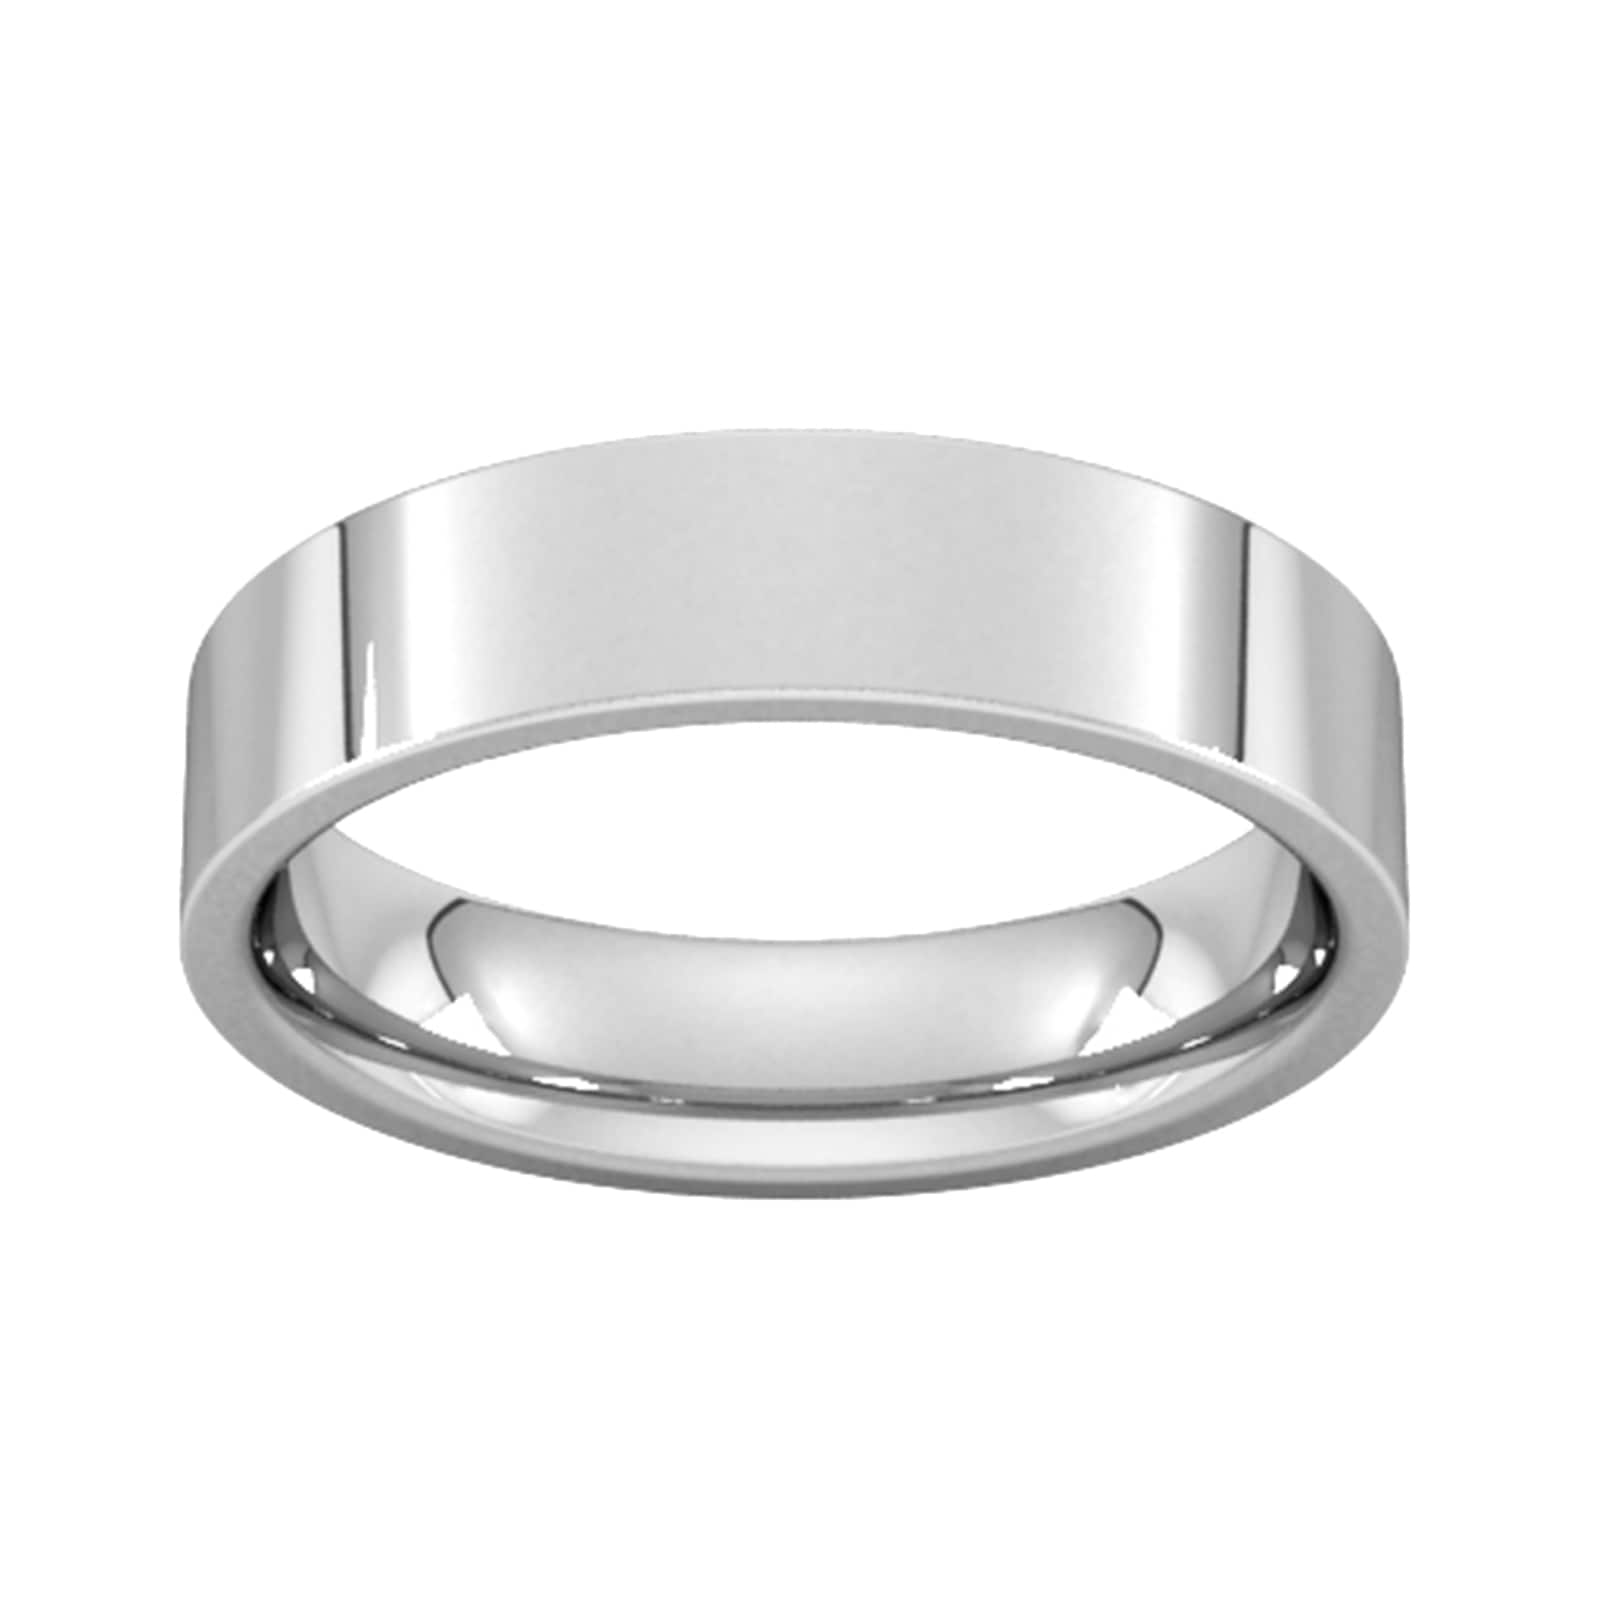 5mm Flat Court Heavy Wedding Ring In 9 Carat White Gold - Ring Size Q